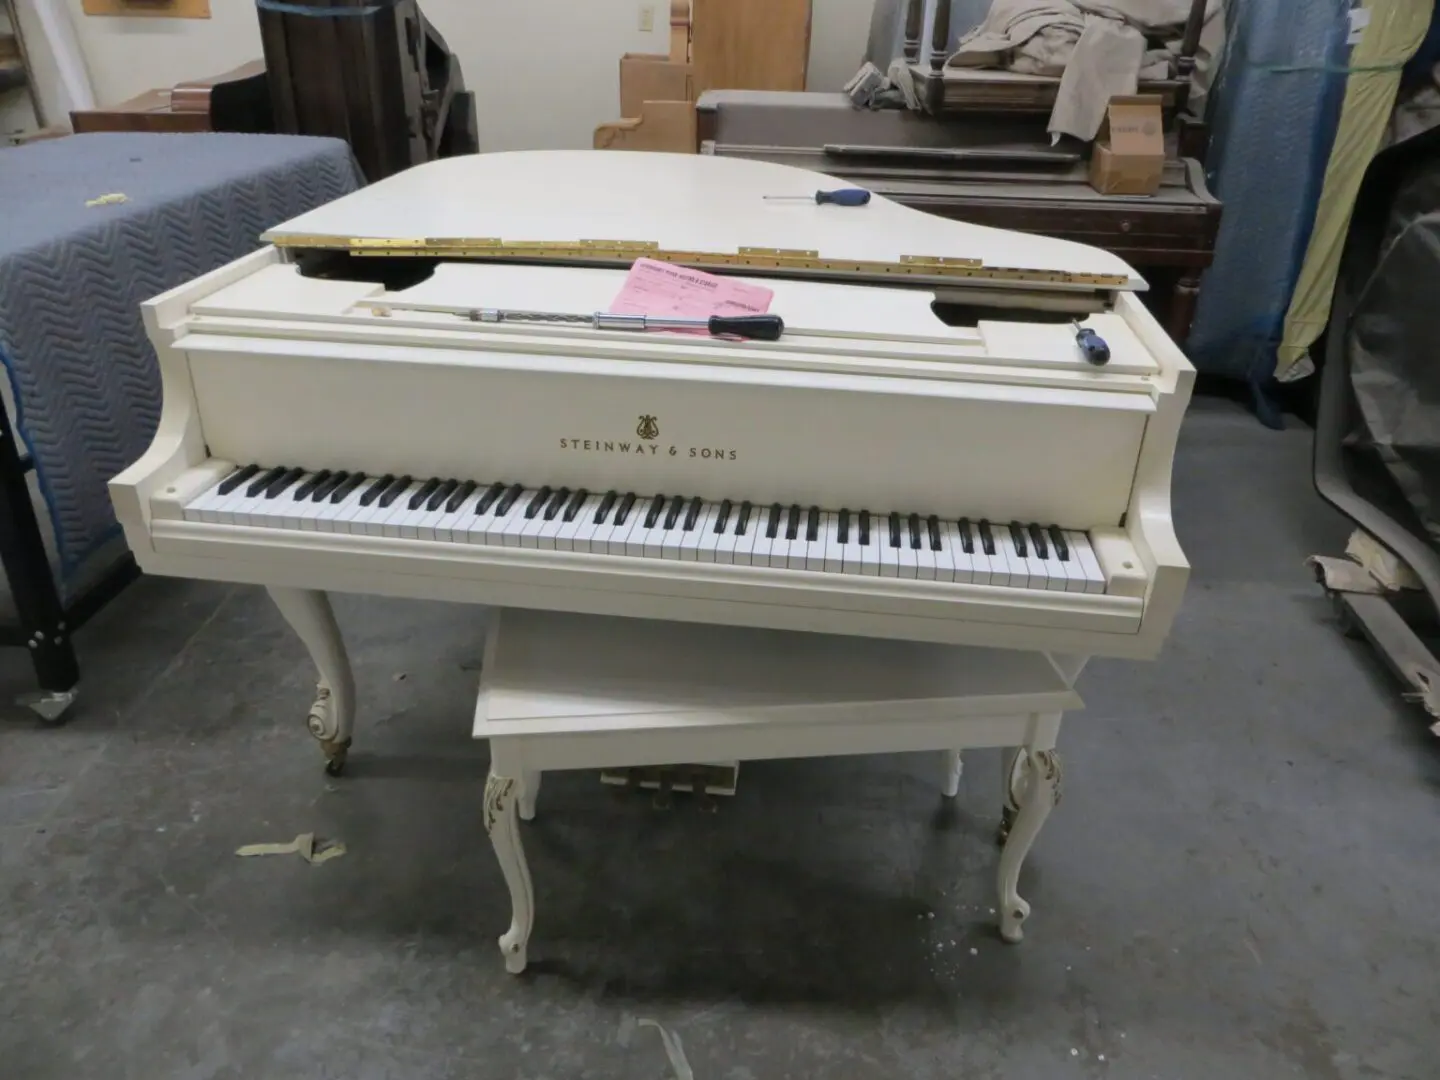 A white piano sitting on top of a wooden bench.